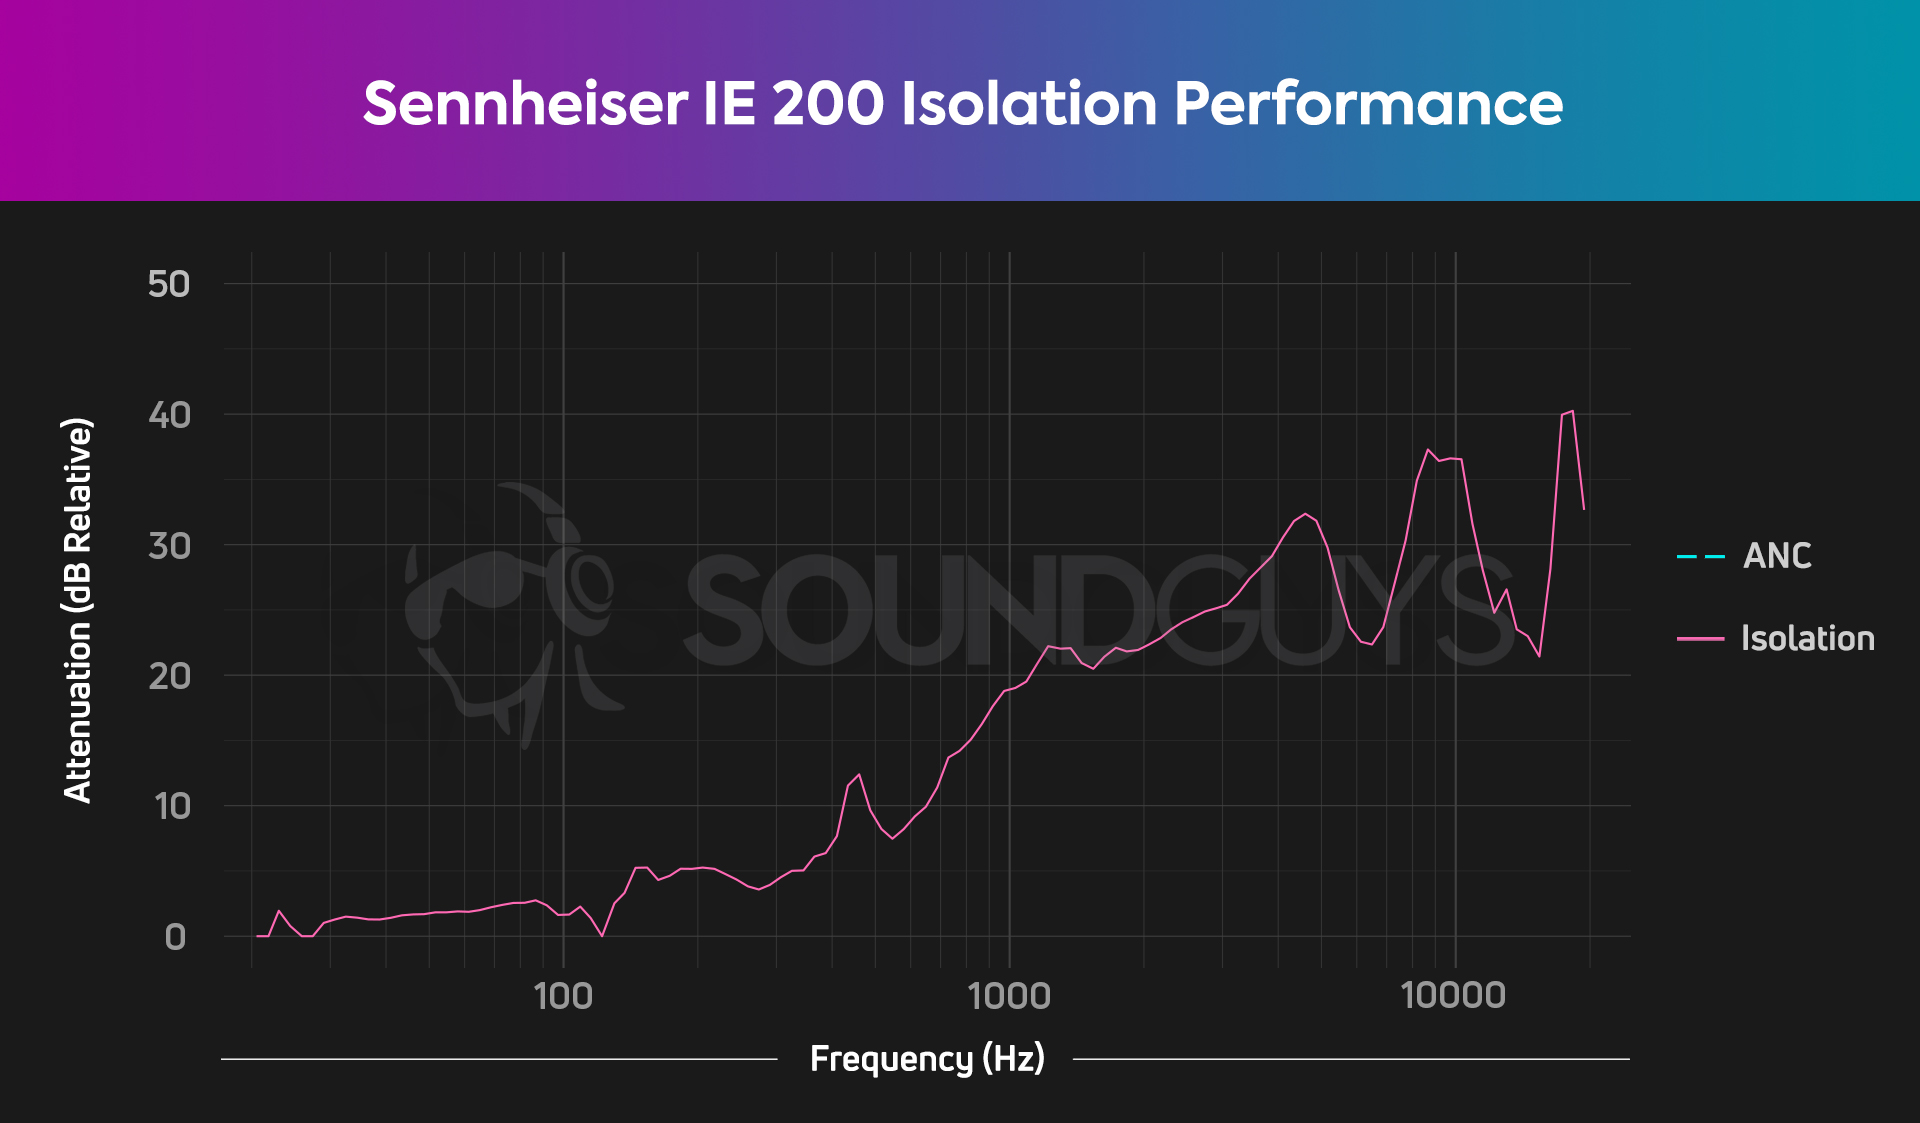 This chart shows the noise attenuation performance of the Sennheiser IE 200.